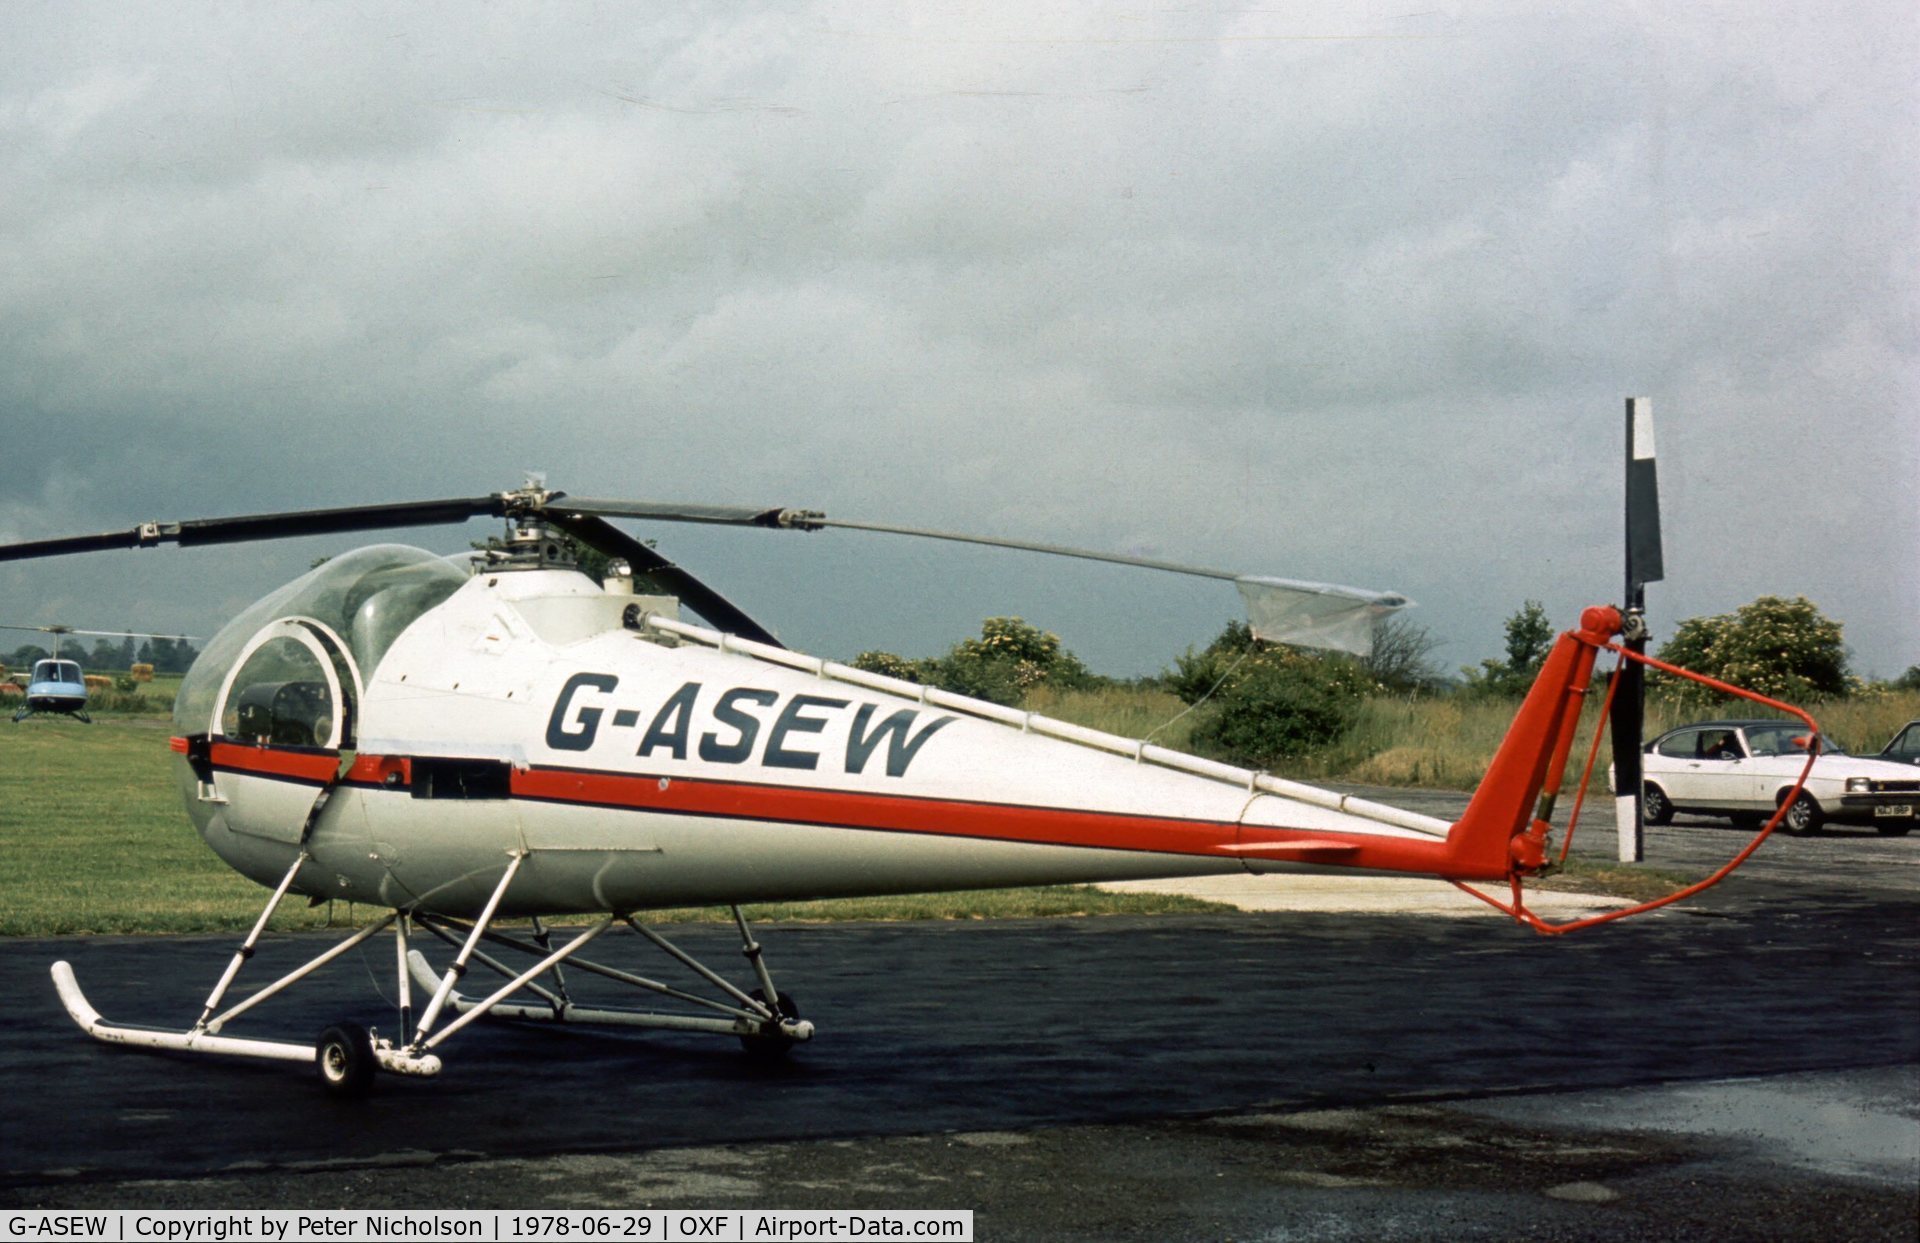 G-ASEW, 1963 Brantly B-2B C/N 308, This helicopter was with the Oxford Air Training School at Kidlington in the Summer of 1978.